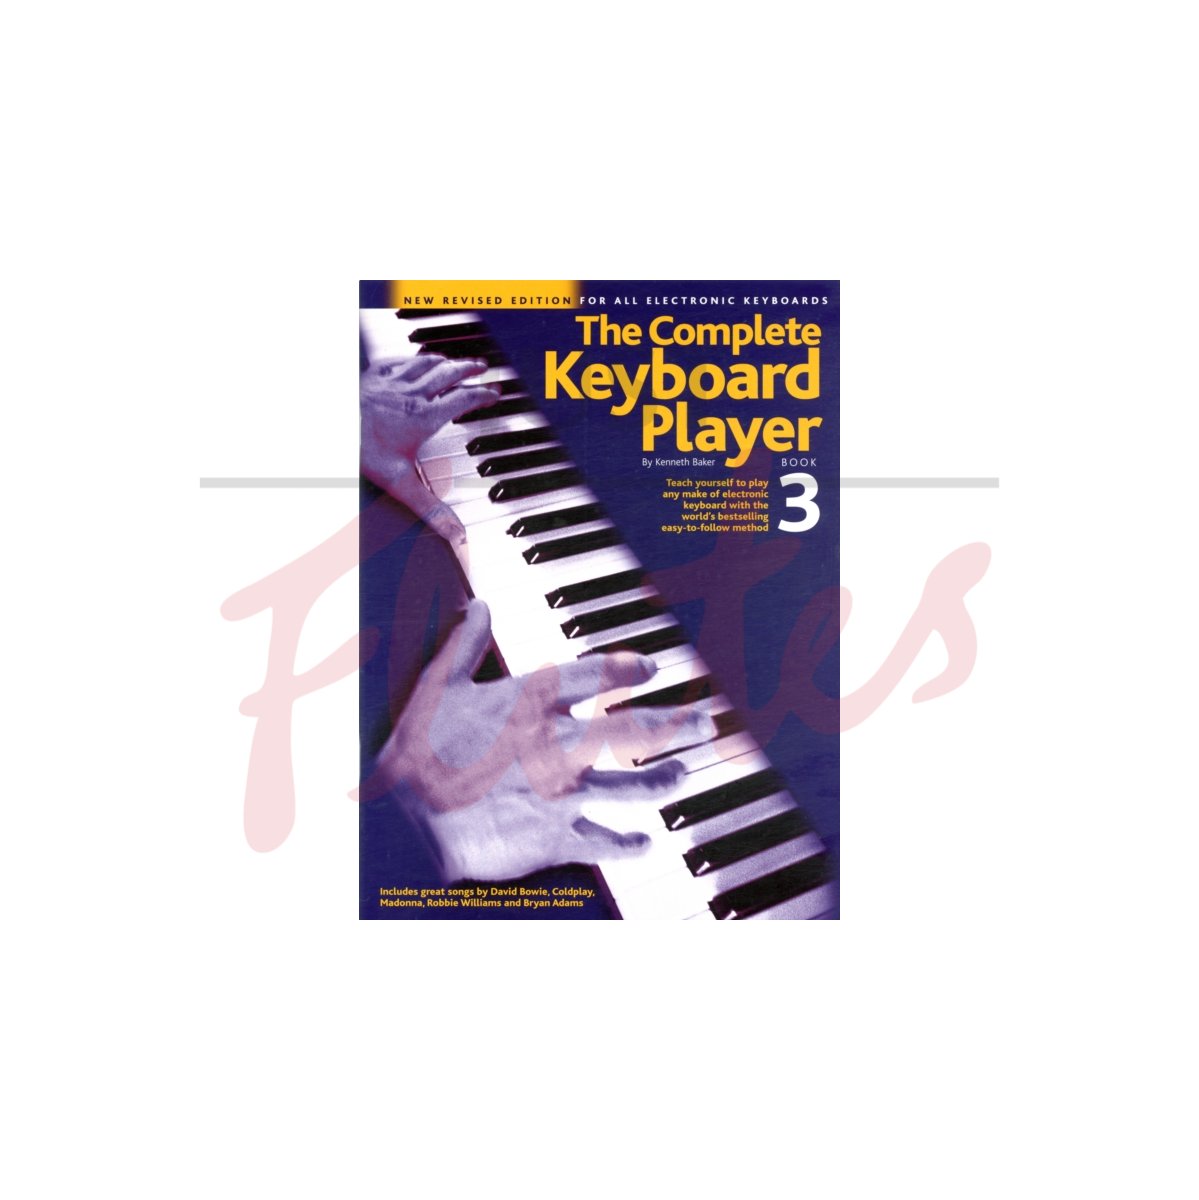 The Complete Keyboard Player Book 3